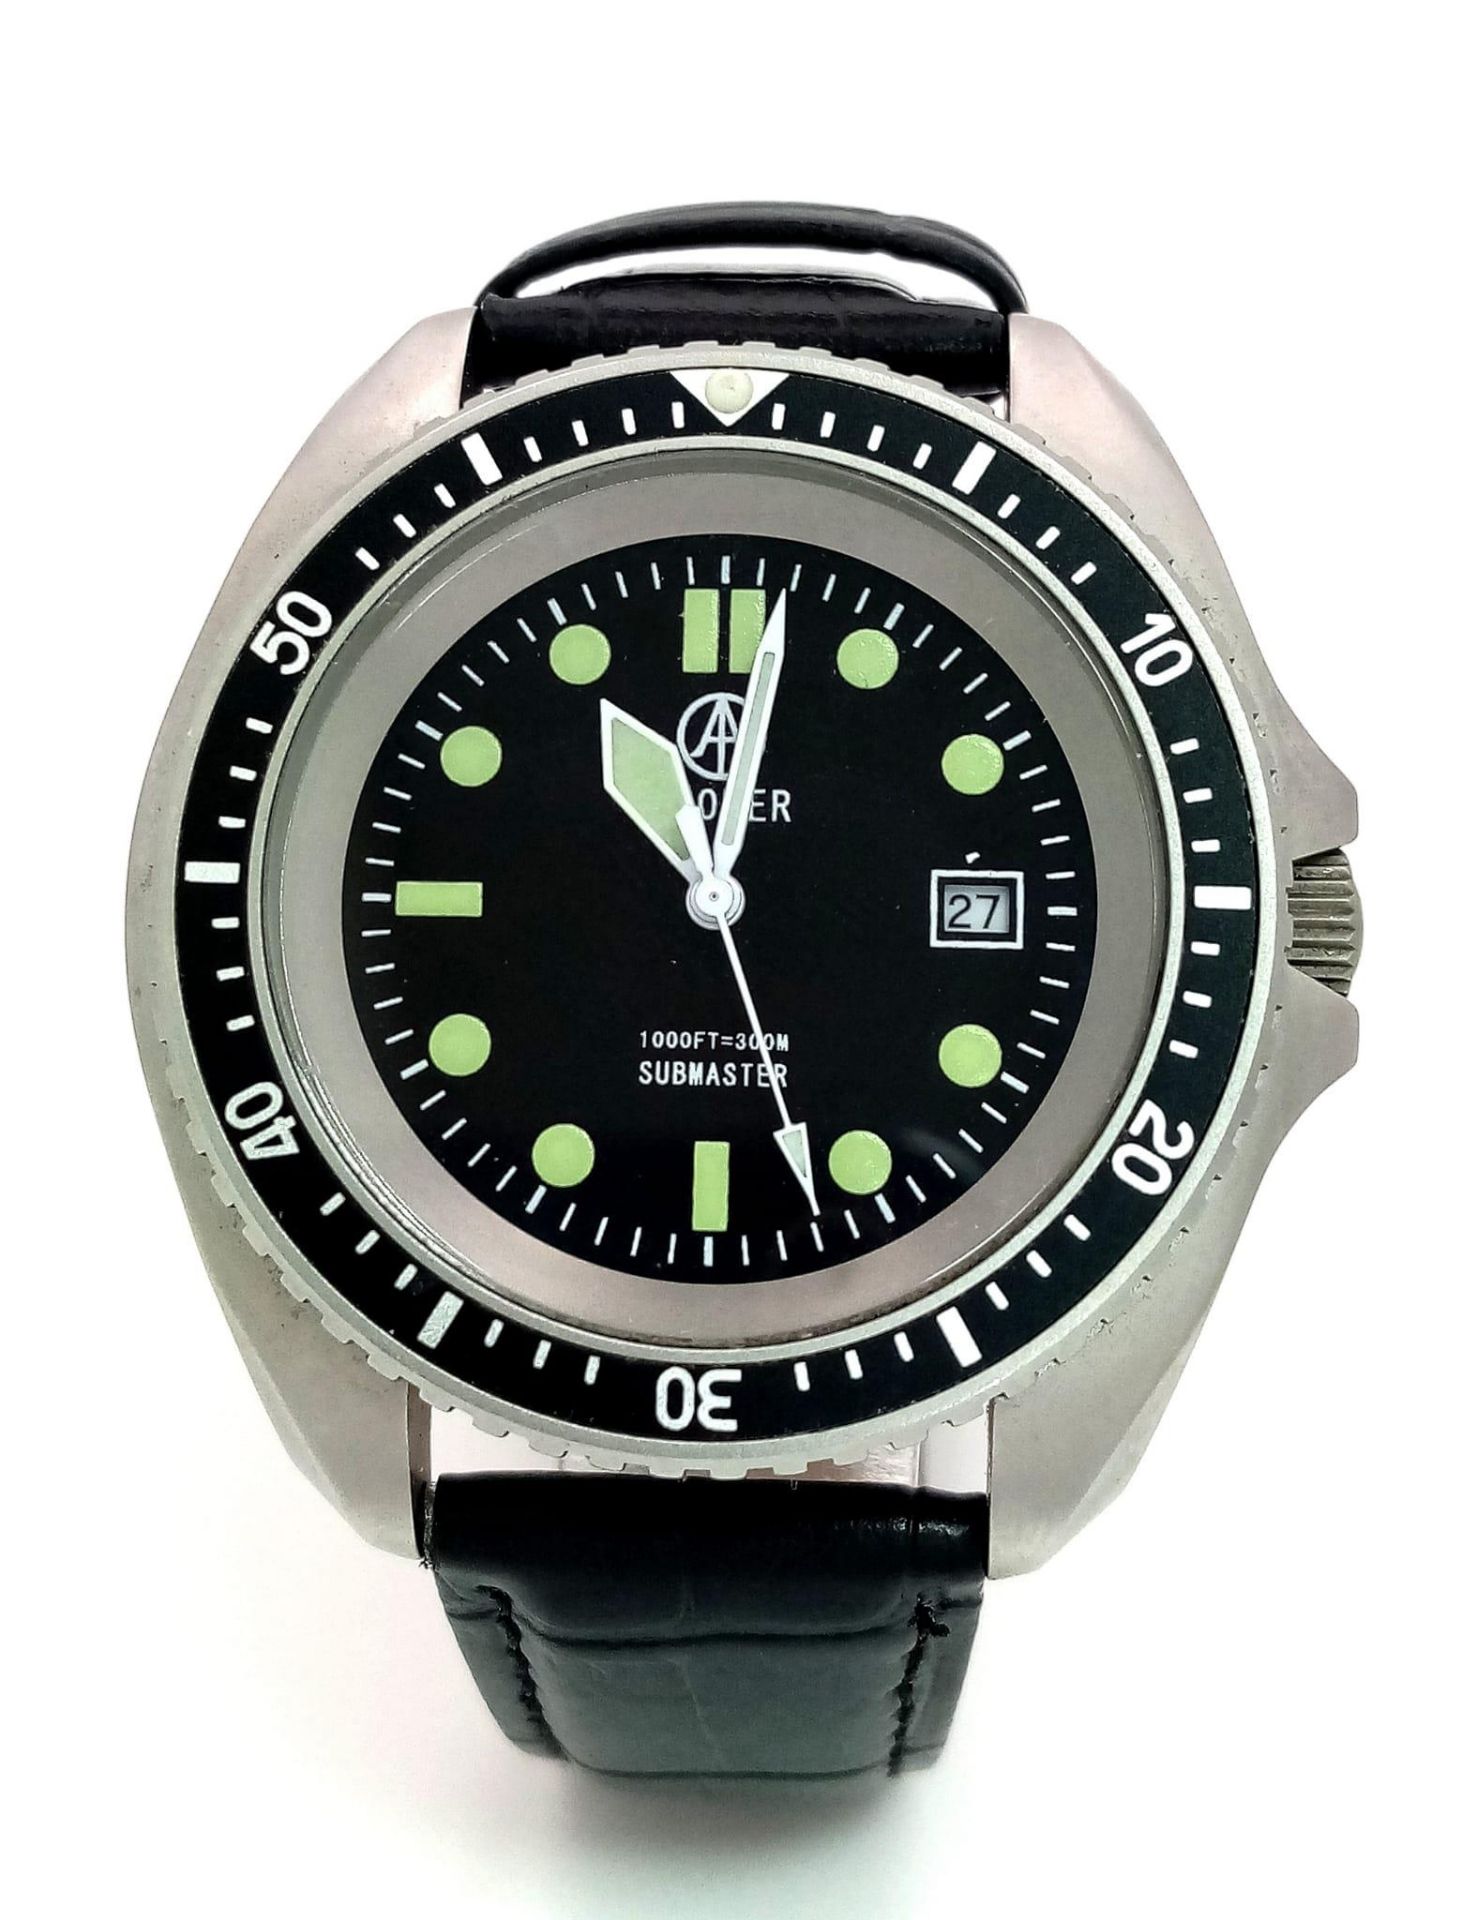 A Cooper Submaster Quartz Divers Watch. Black leather strap. Stainless steel case - 43mm. Black dial